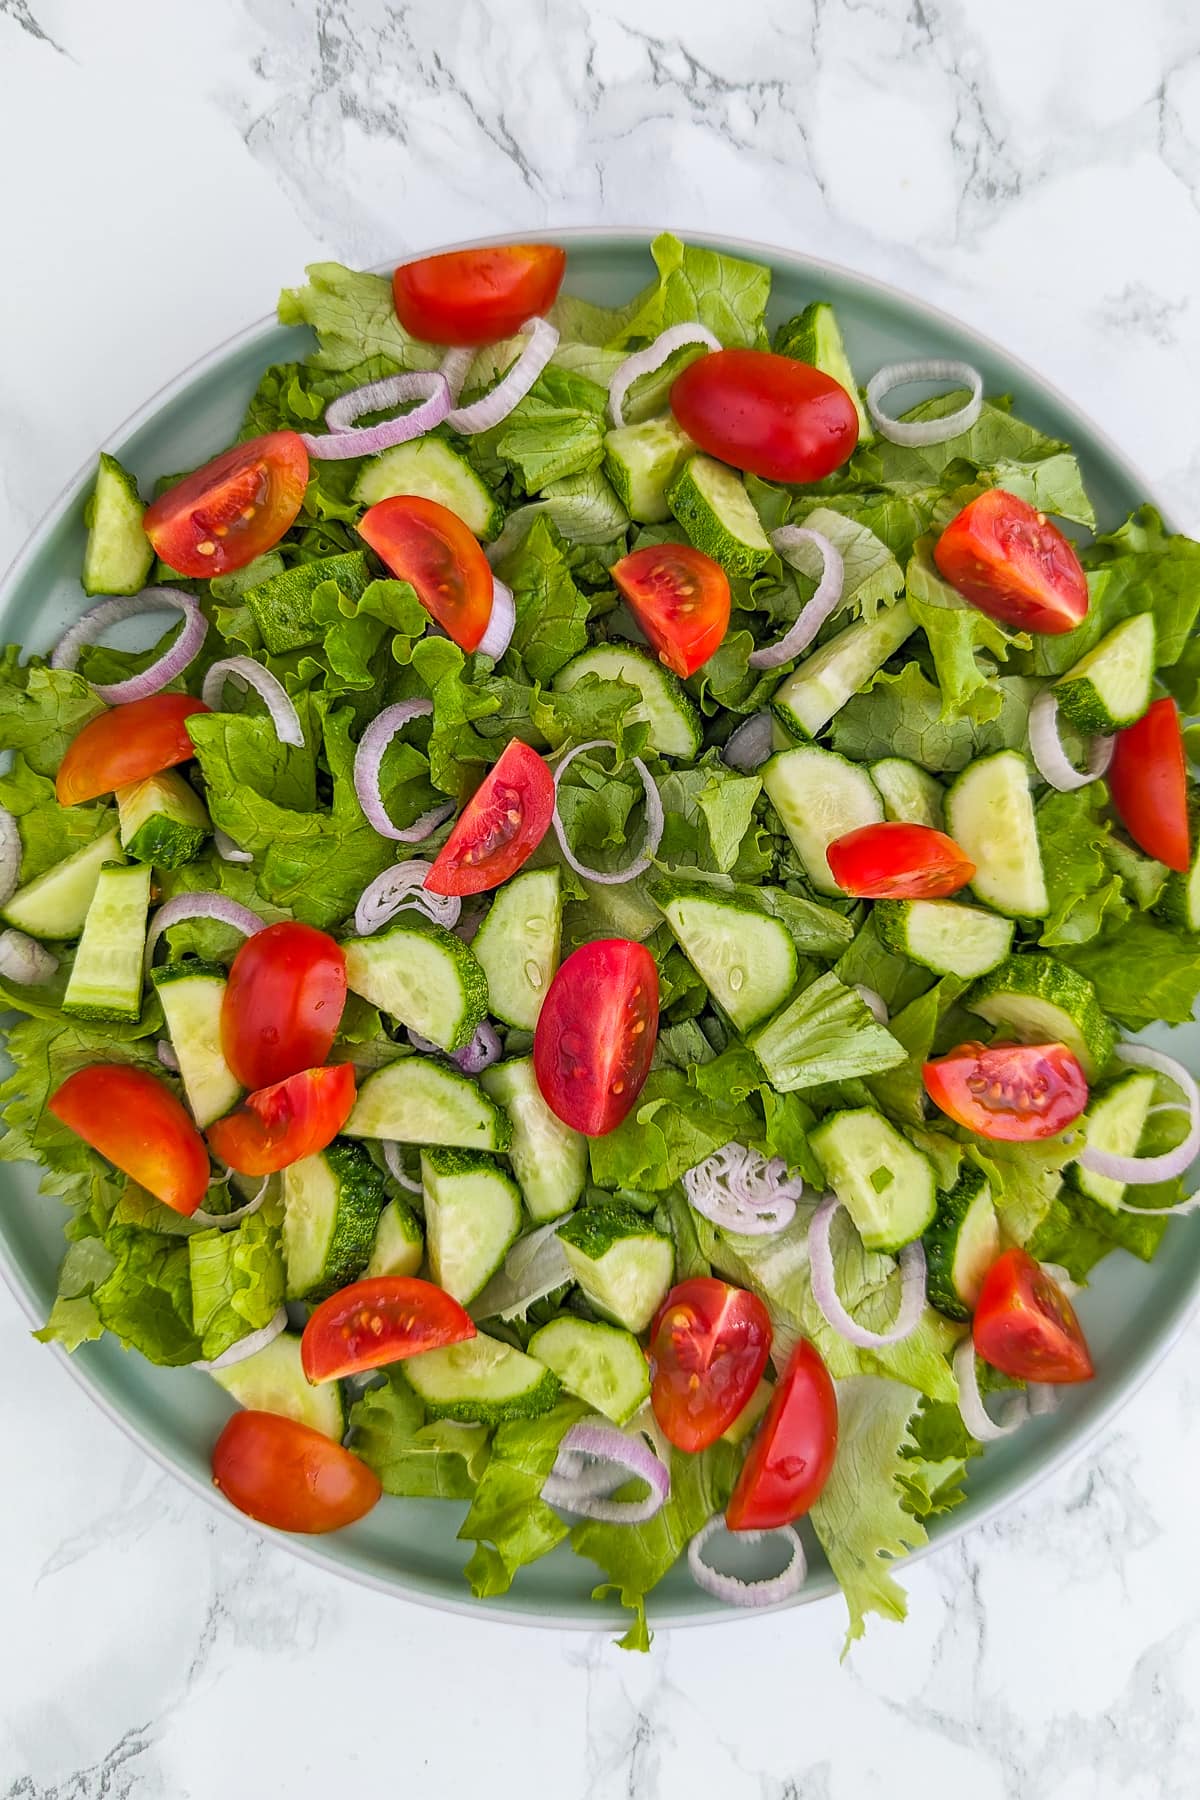 Top view of a plate with green salad with salad leaves, cucumbers, tomatoes and onions.